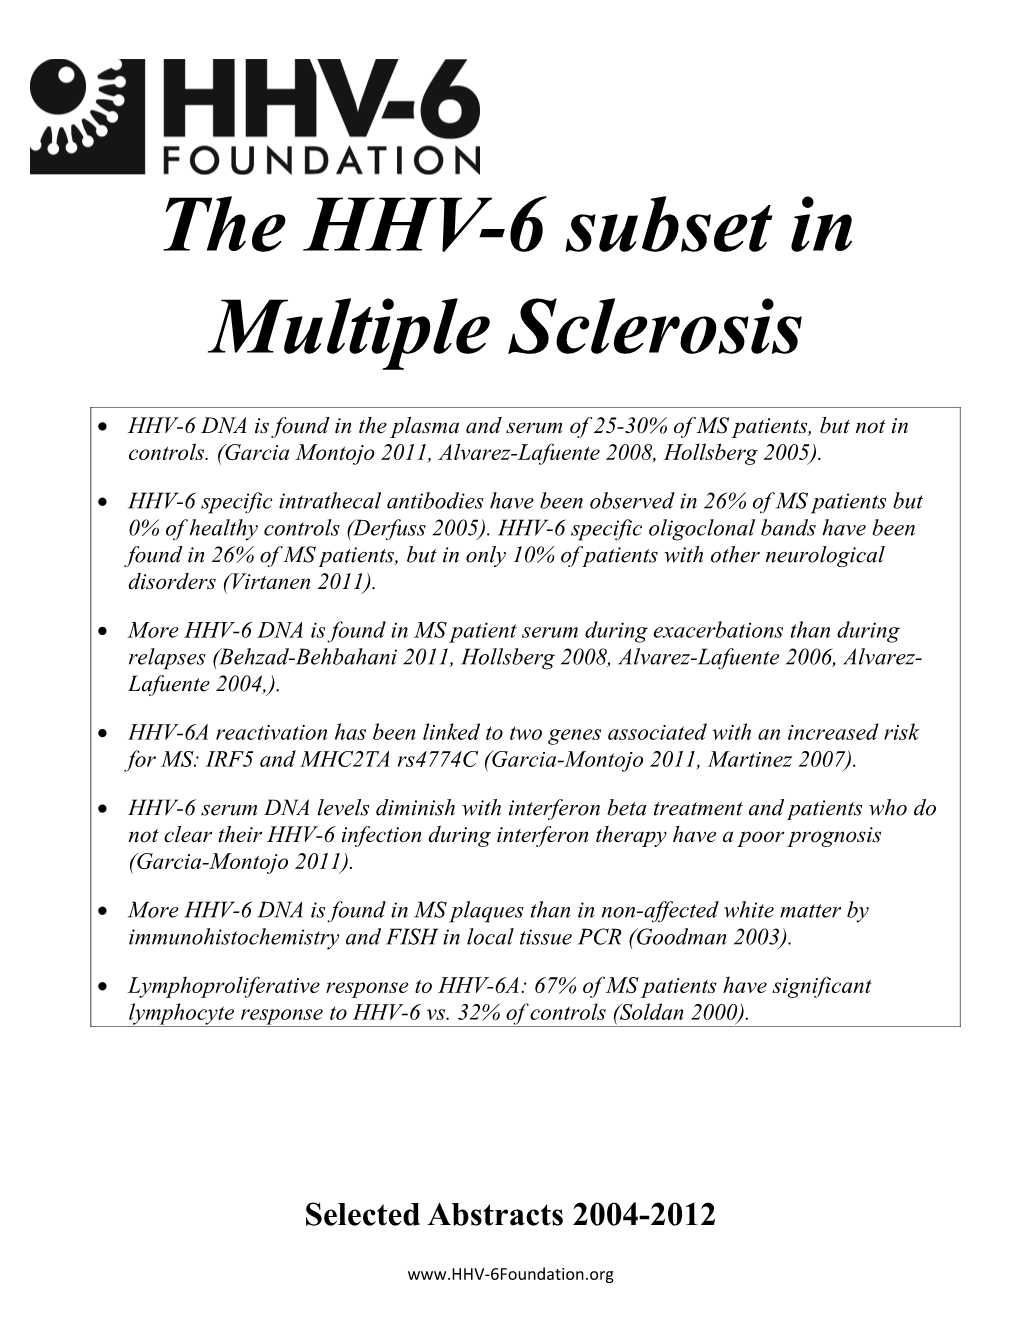 The HHV-6 Subset In